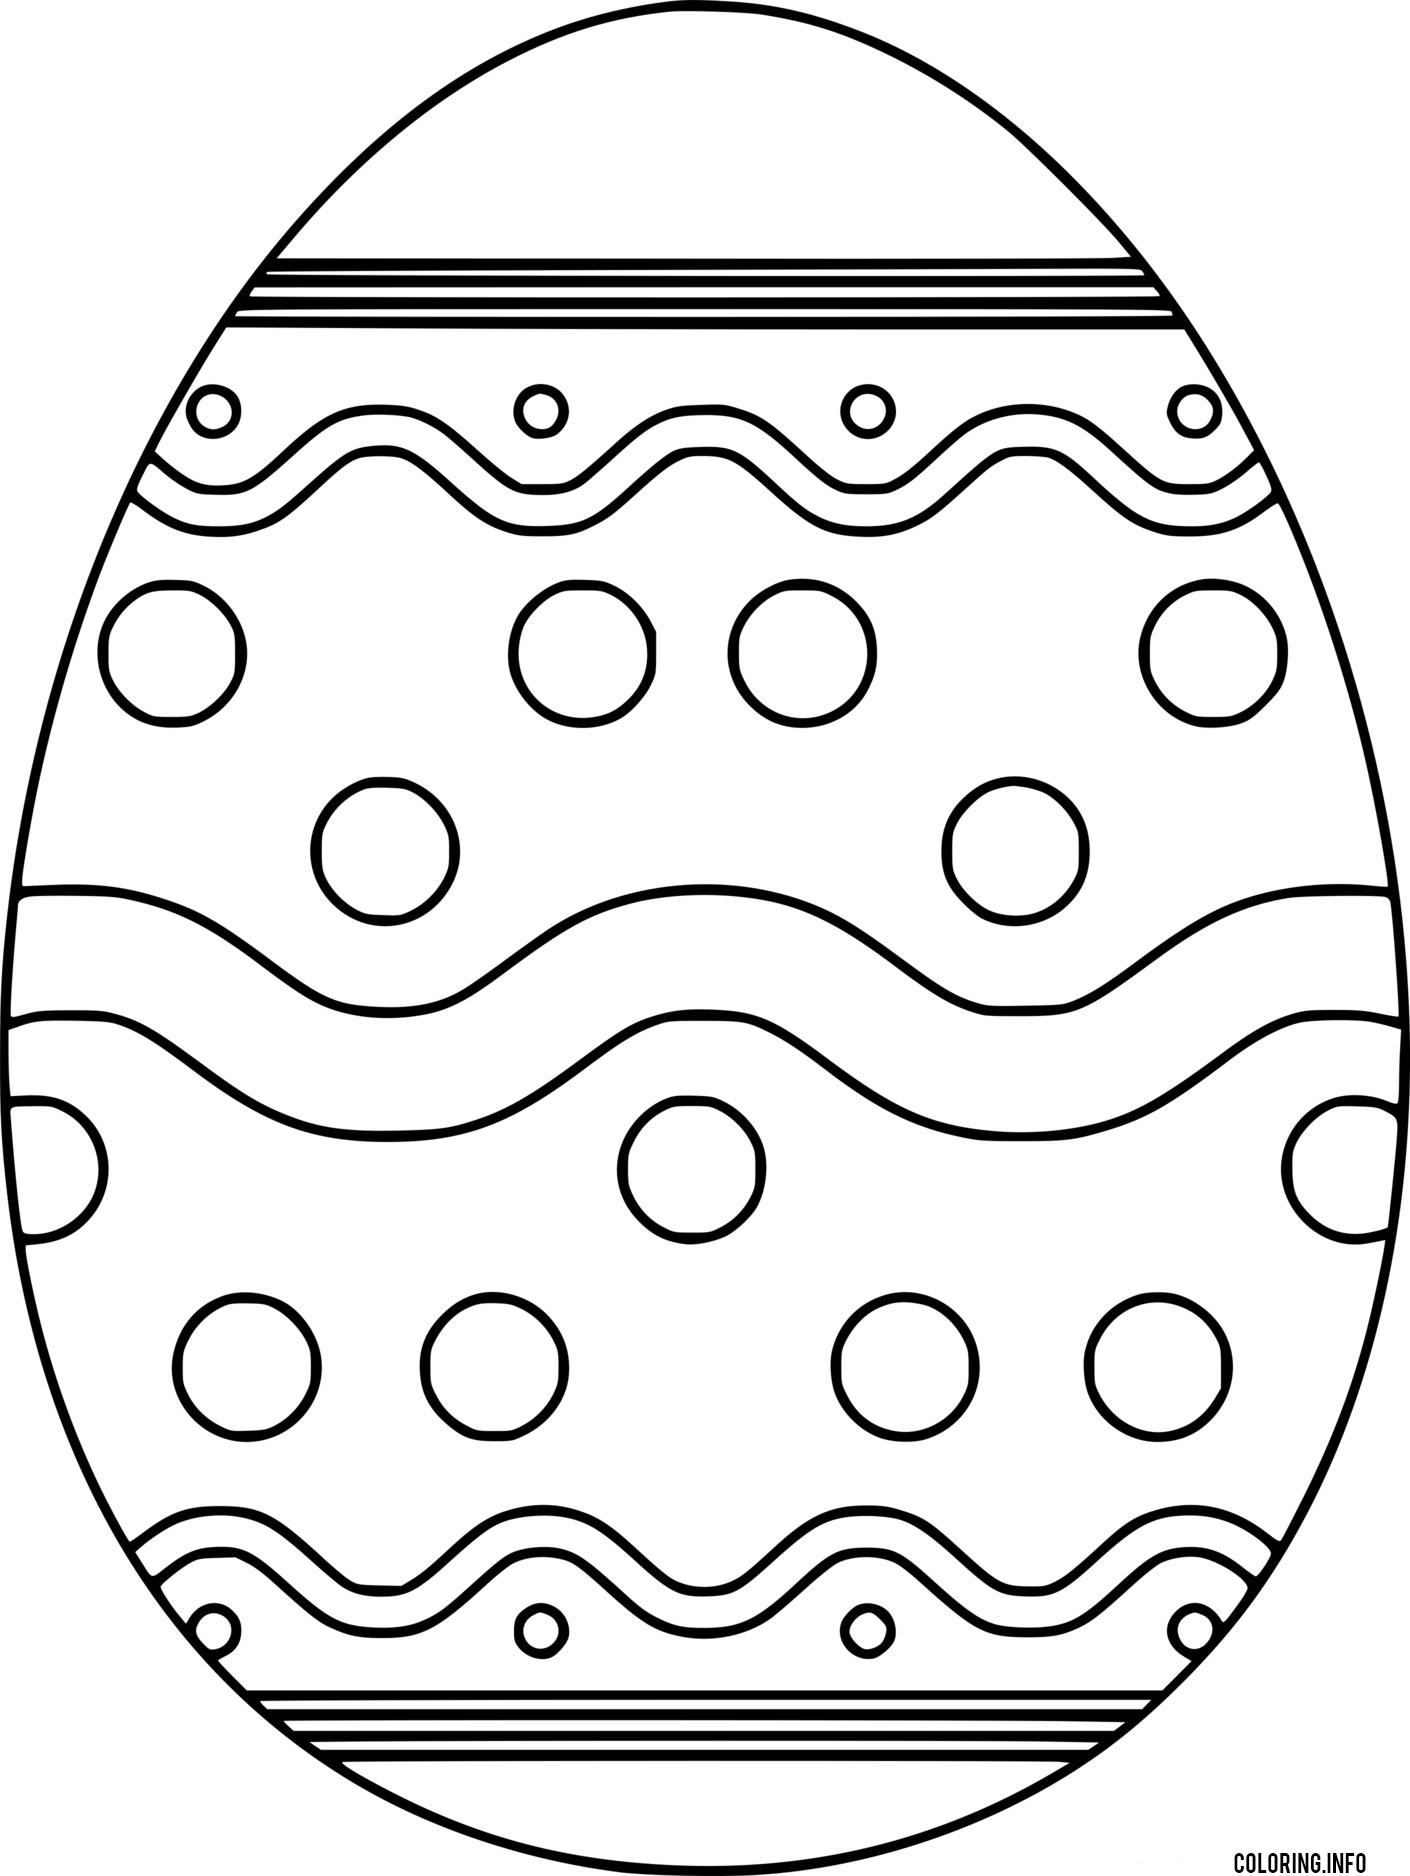 Easter Egg With Water Patterns coloring